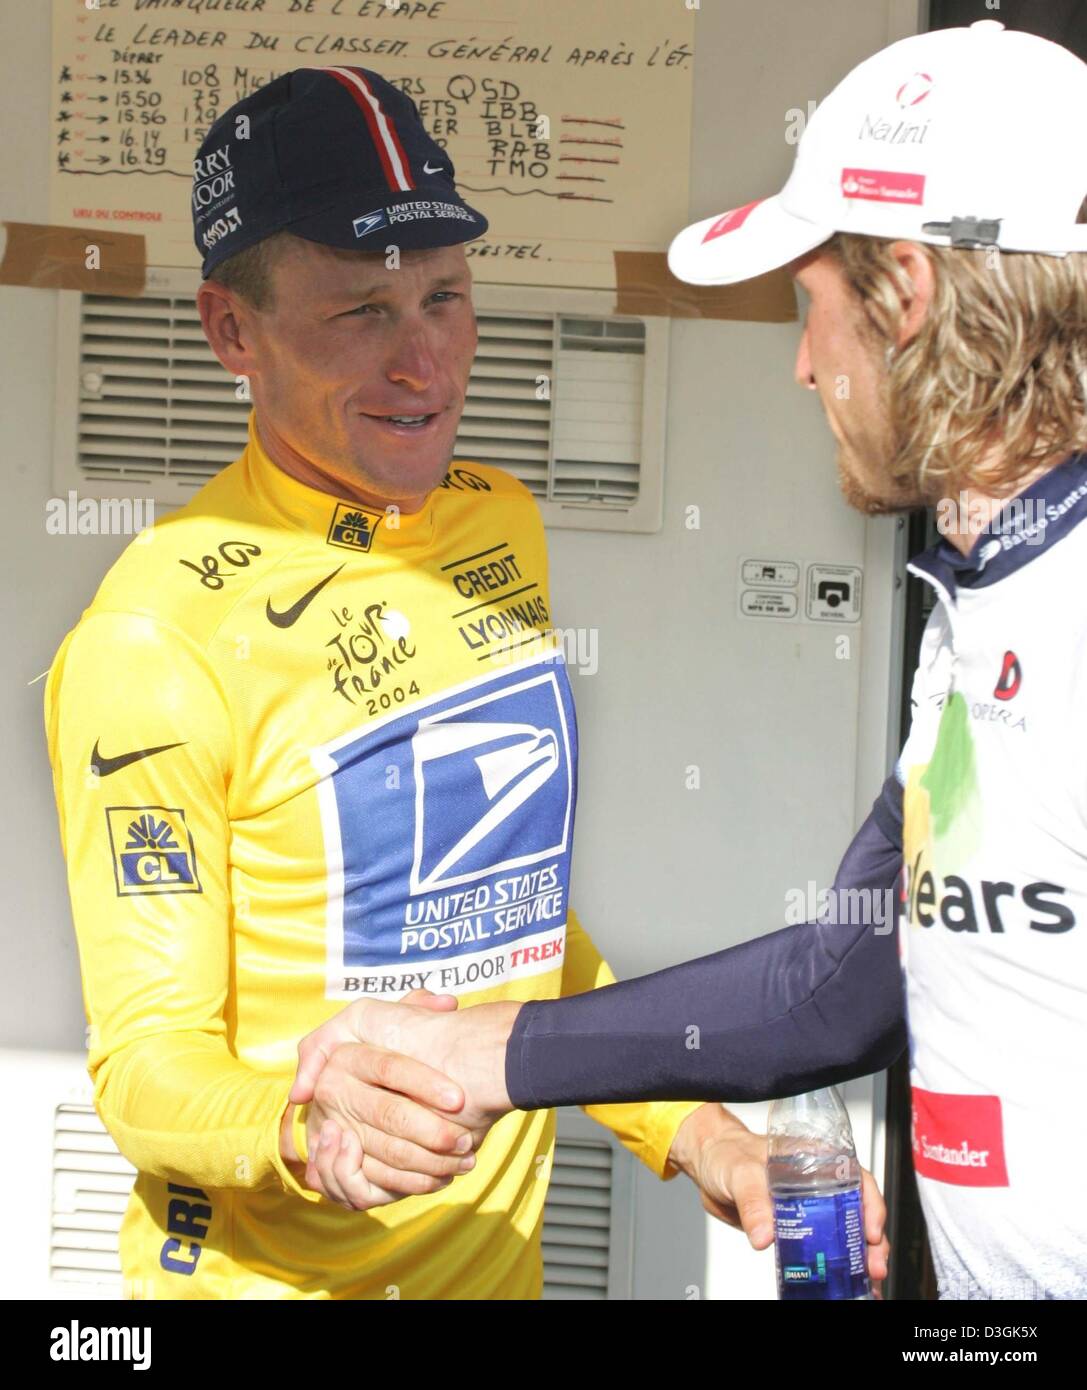 (dpa) - US Postal team rider Lance Armstrong from the US (L), wearing the race leader's yellow jersey, congratulates Russian Vladimir Karpets of Illes Balears, wearing the best young rider's white jersey, following the 19th stage of the Tour de France cycling race, in Besancon, France, 24 July 2004. Stock Photo